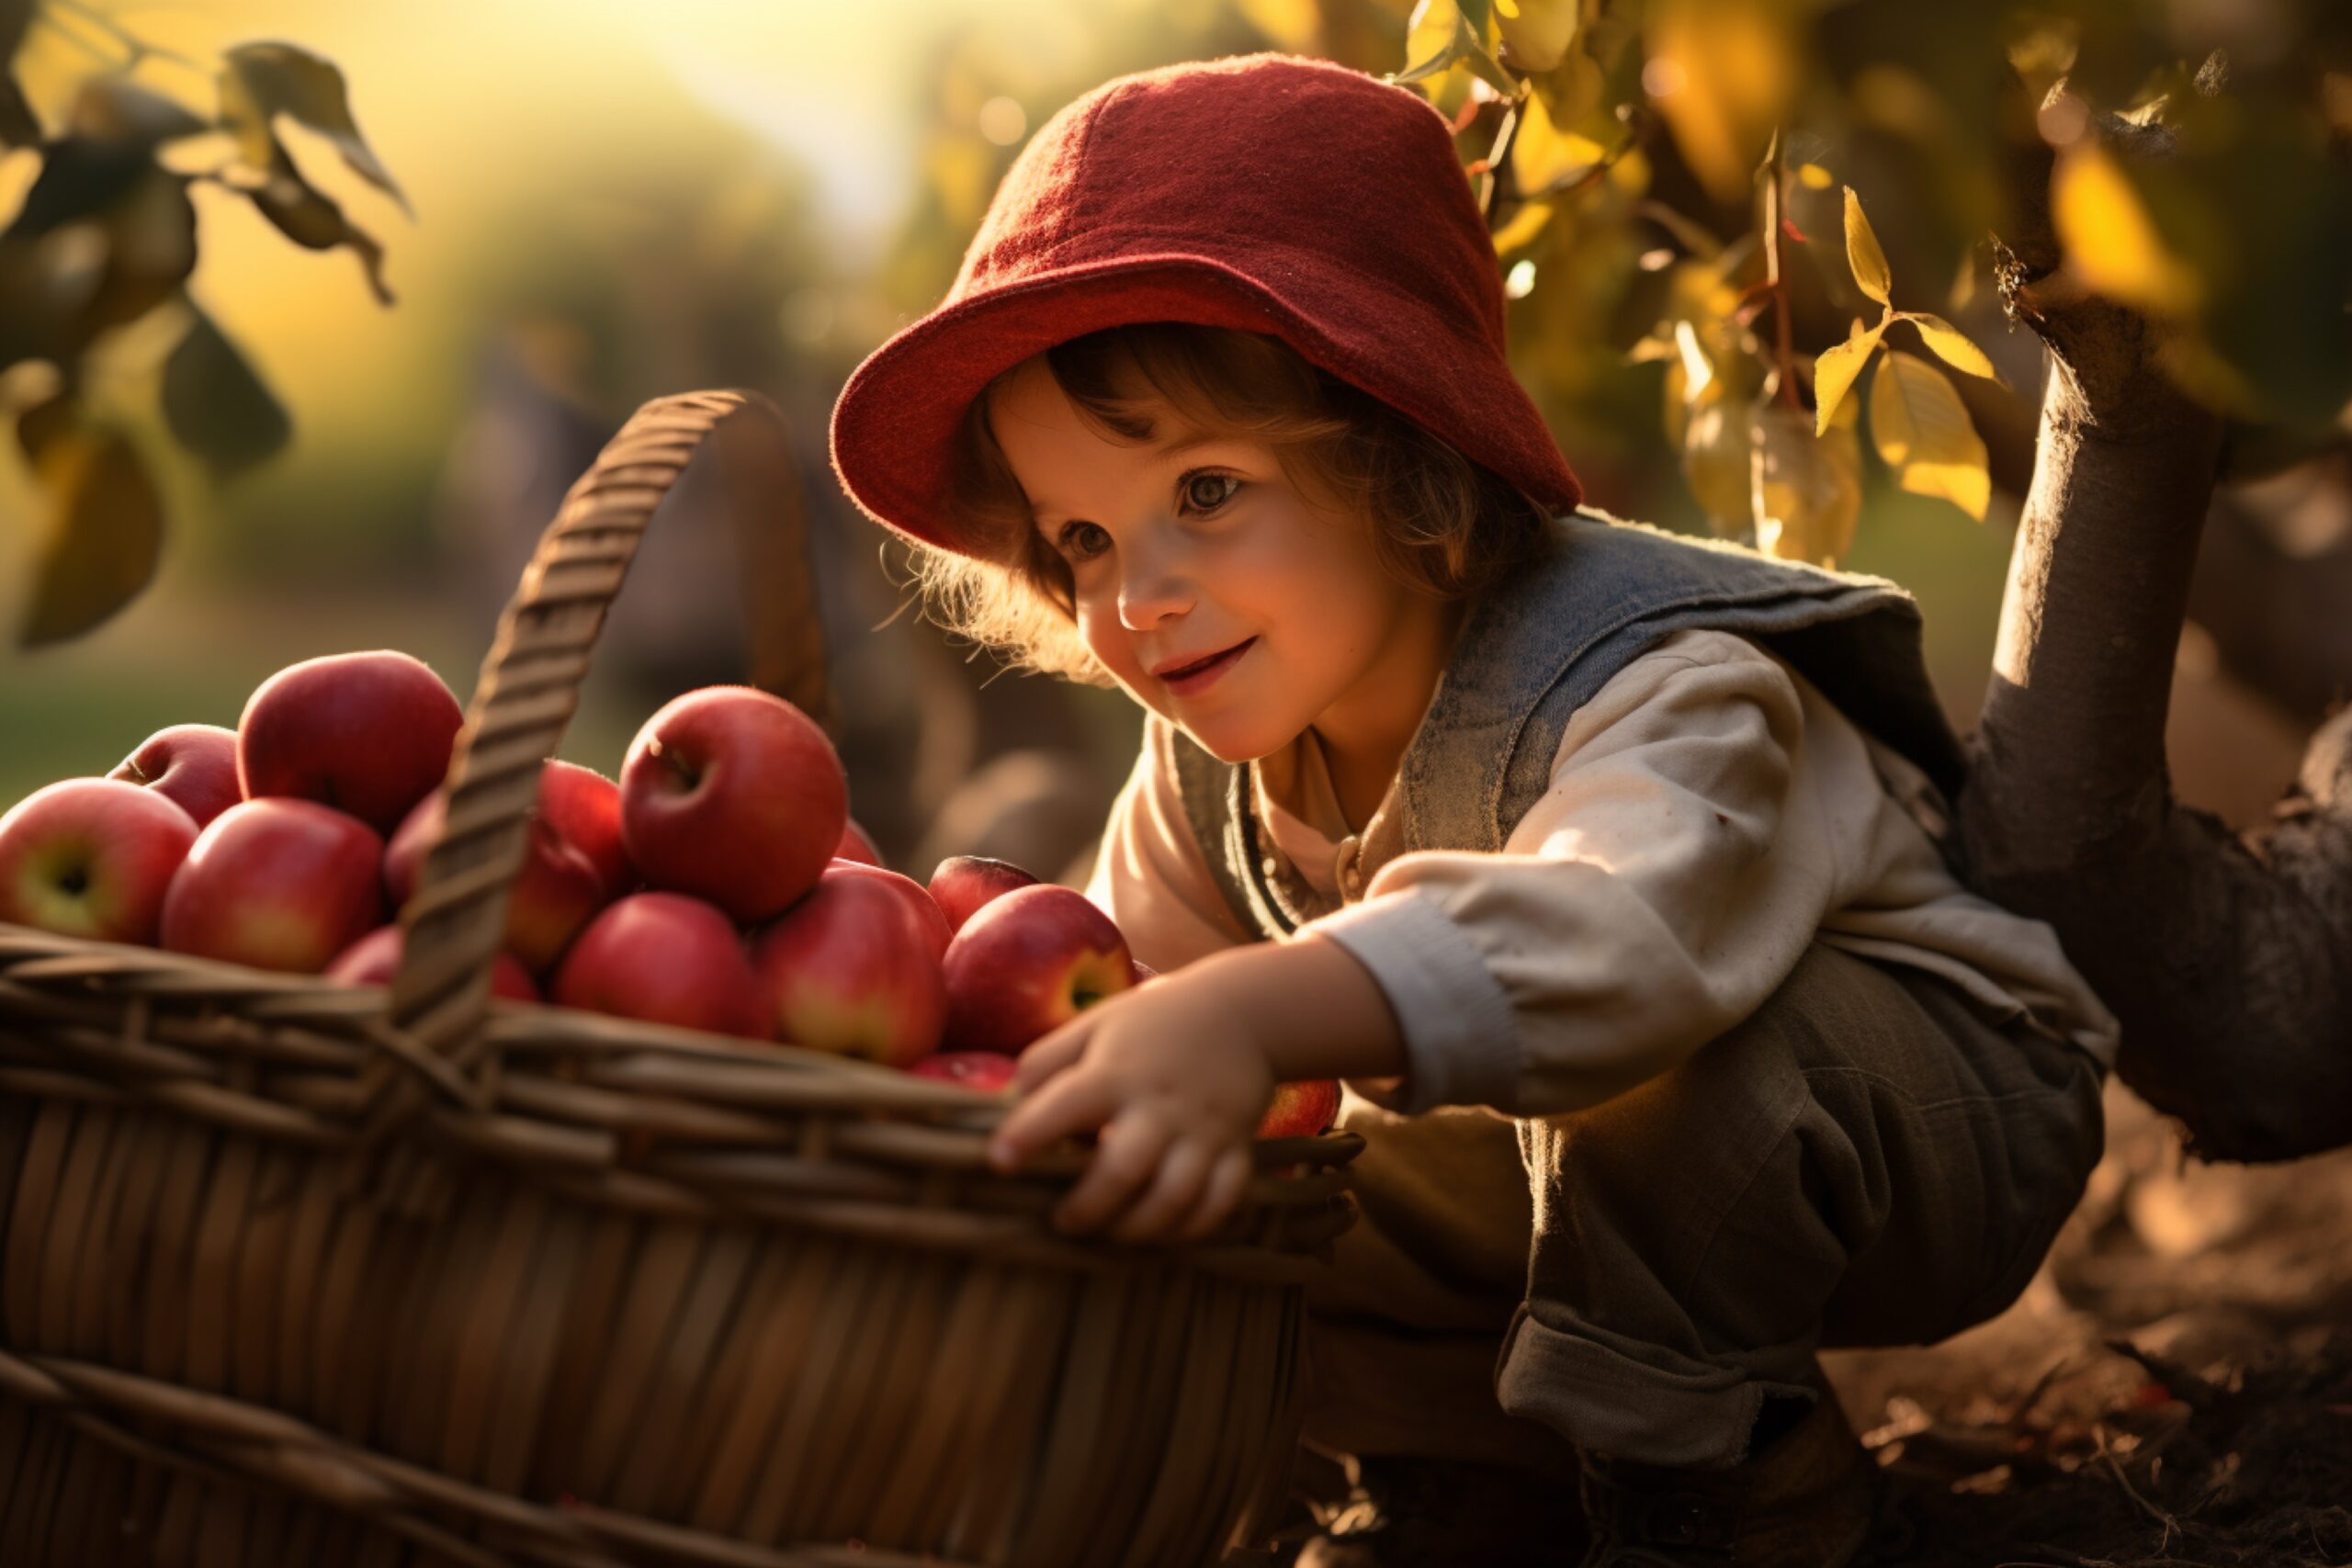 A girl collecting apples in a basket beautiful harvest seasons fall